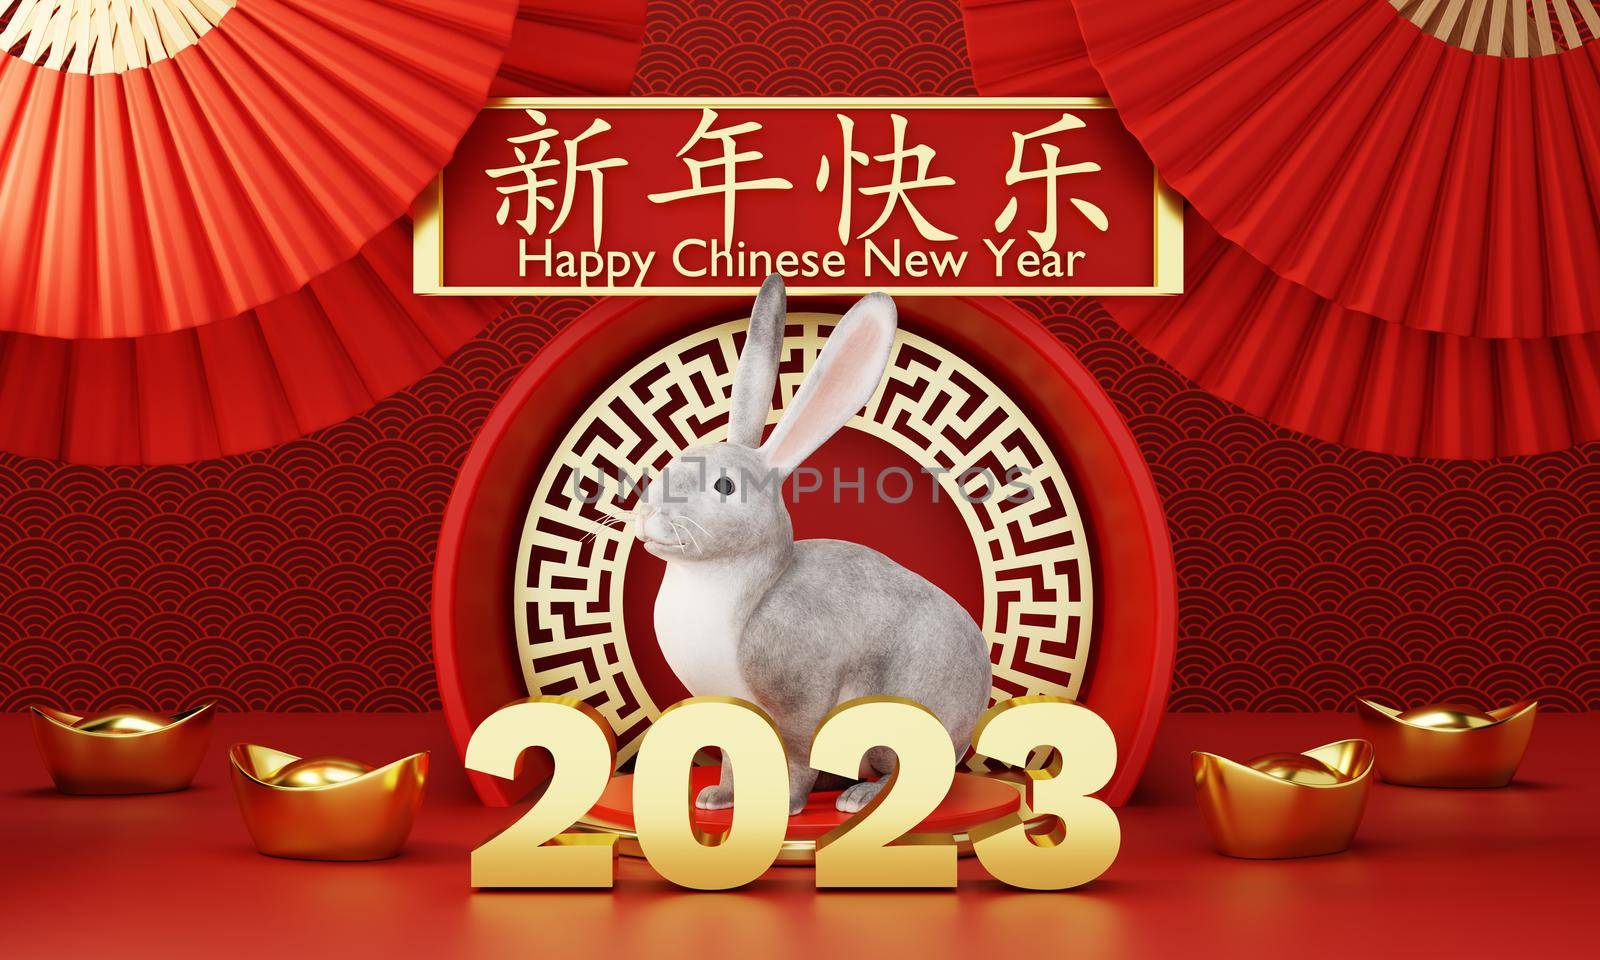 Chinese new year 2023 year of rabbit or bunny on red Chinese pattern with hand fan background. Holiday of Asian and traditional culture concept. 3D illustration rendering